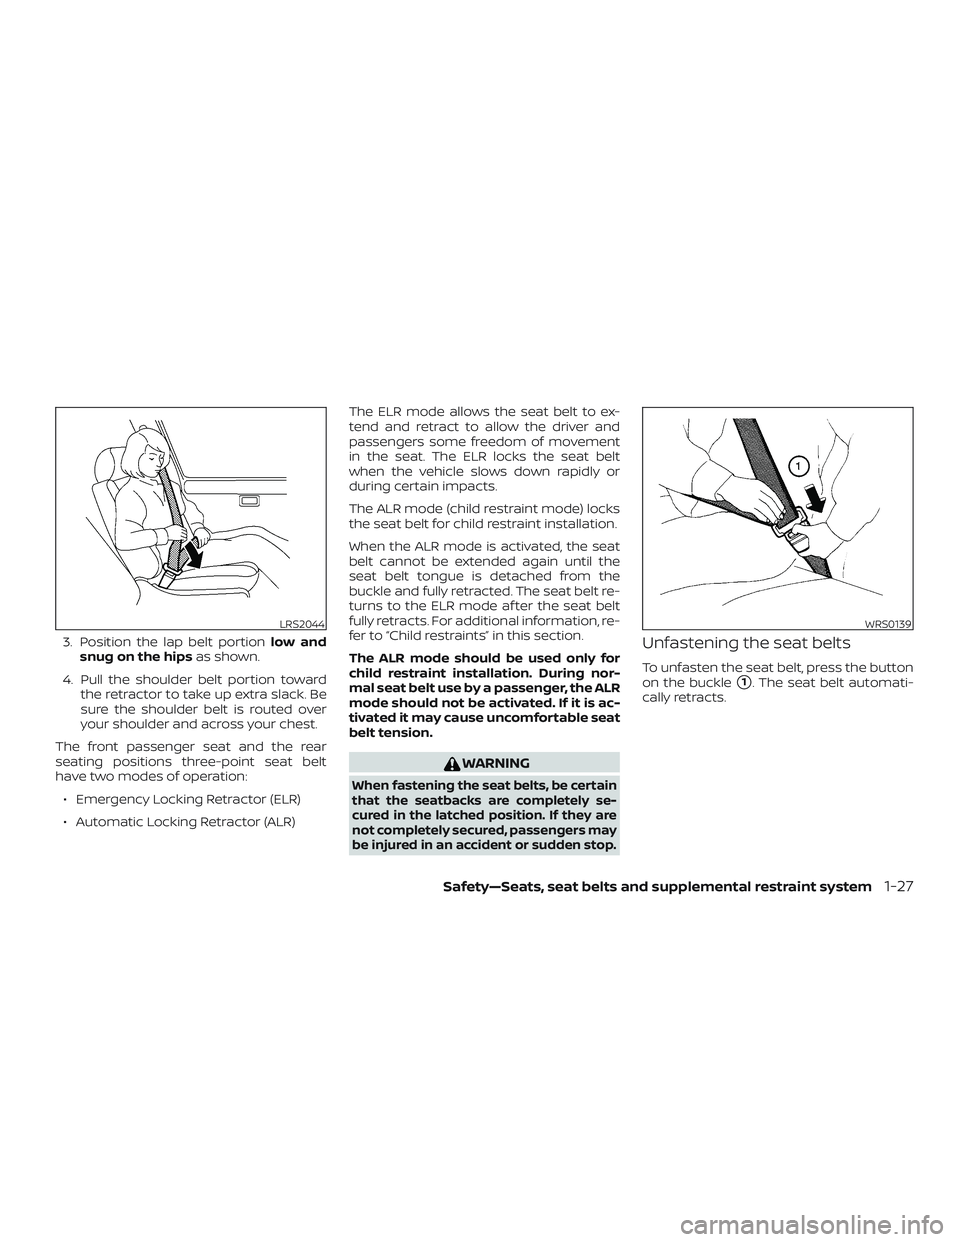 NISSAN NV PASSENGER VAN 2018 Service Manual 3. Position the lap belt portionlow and
snug on the hips as shown.
4. Pull the shoulder belt portion toward the retractor to take up extra slack. Be
sure the shoulder belt is routed over
your shoulder